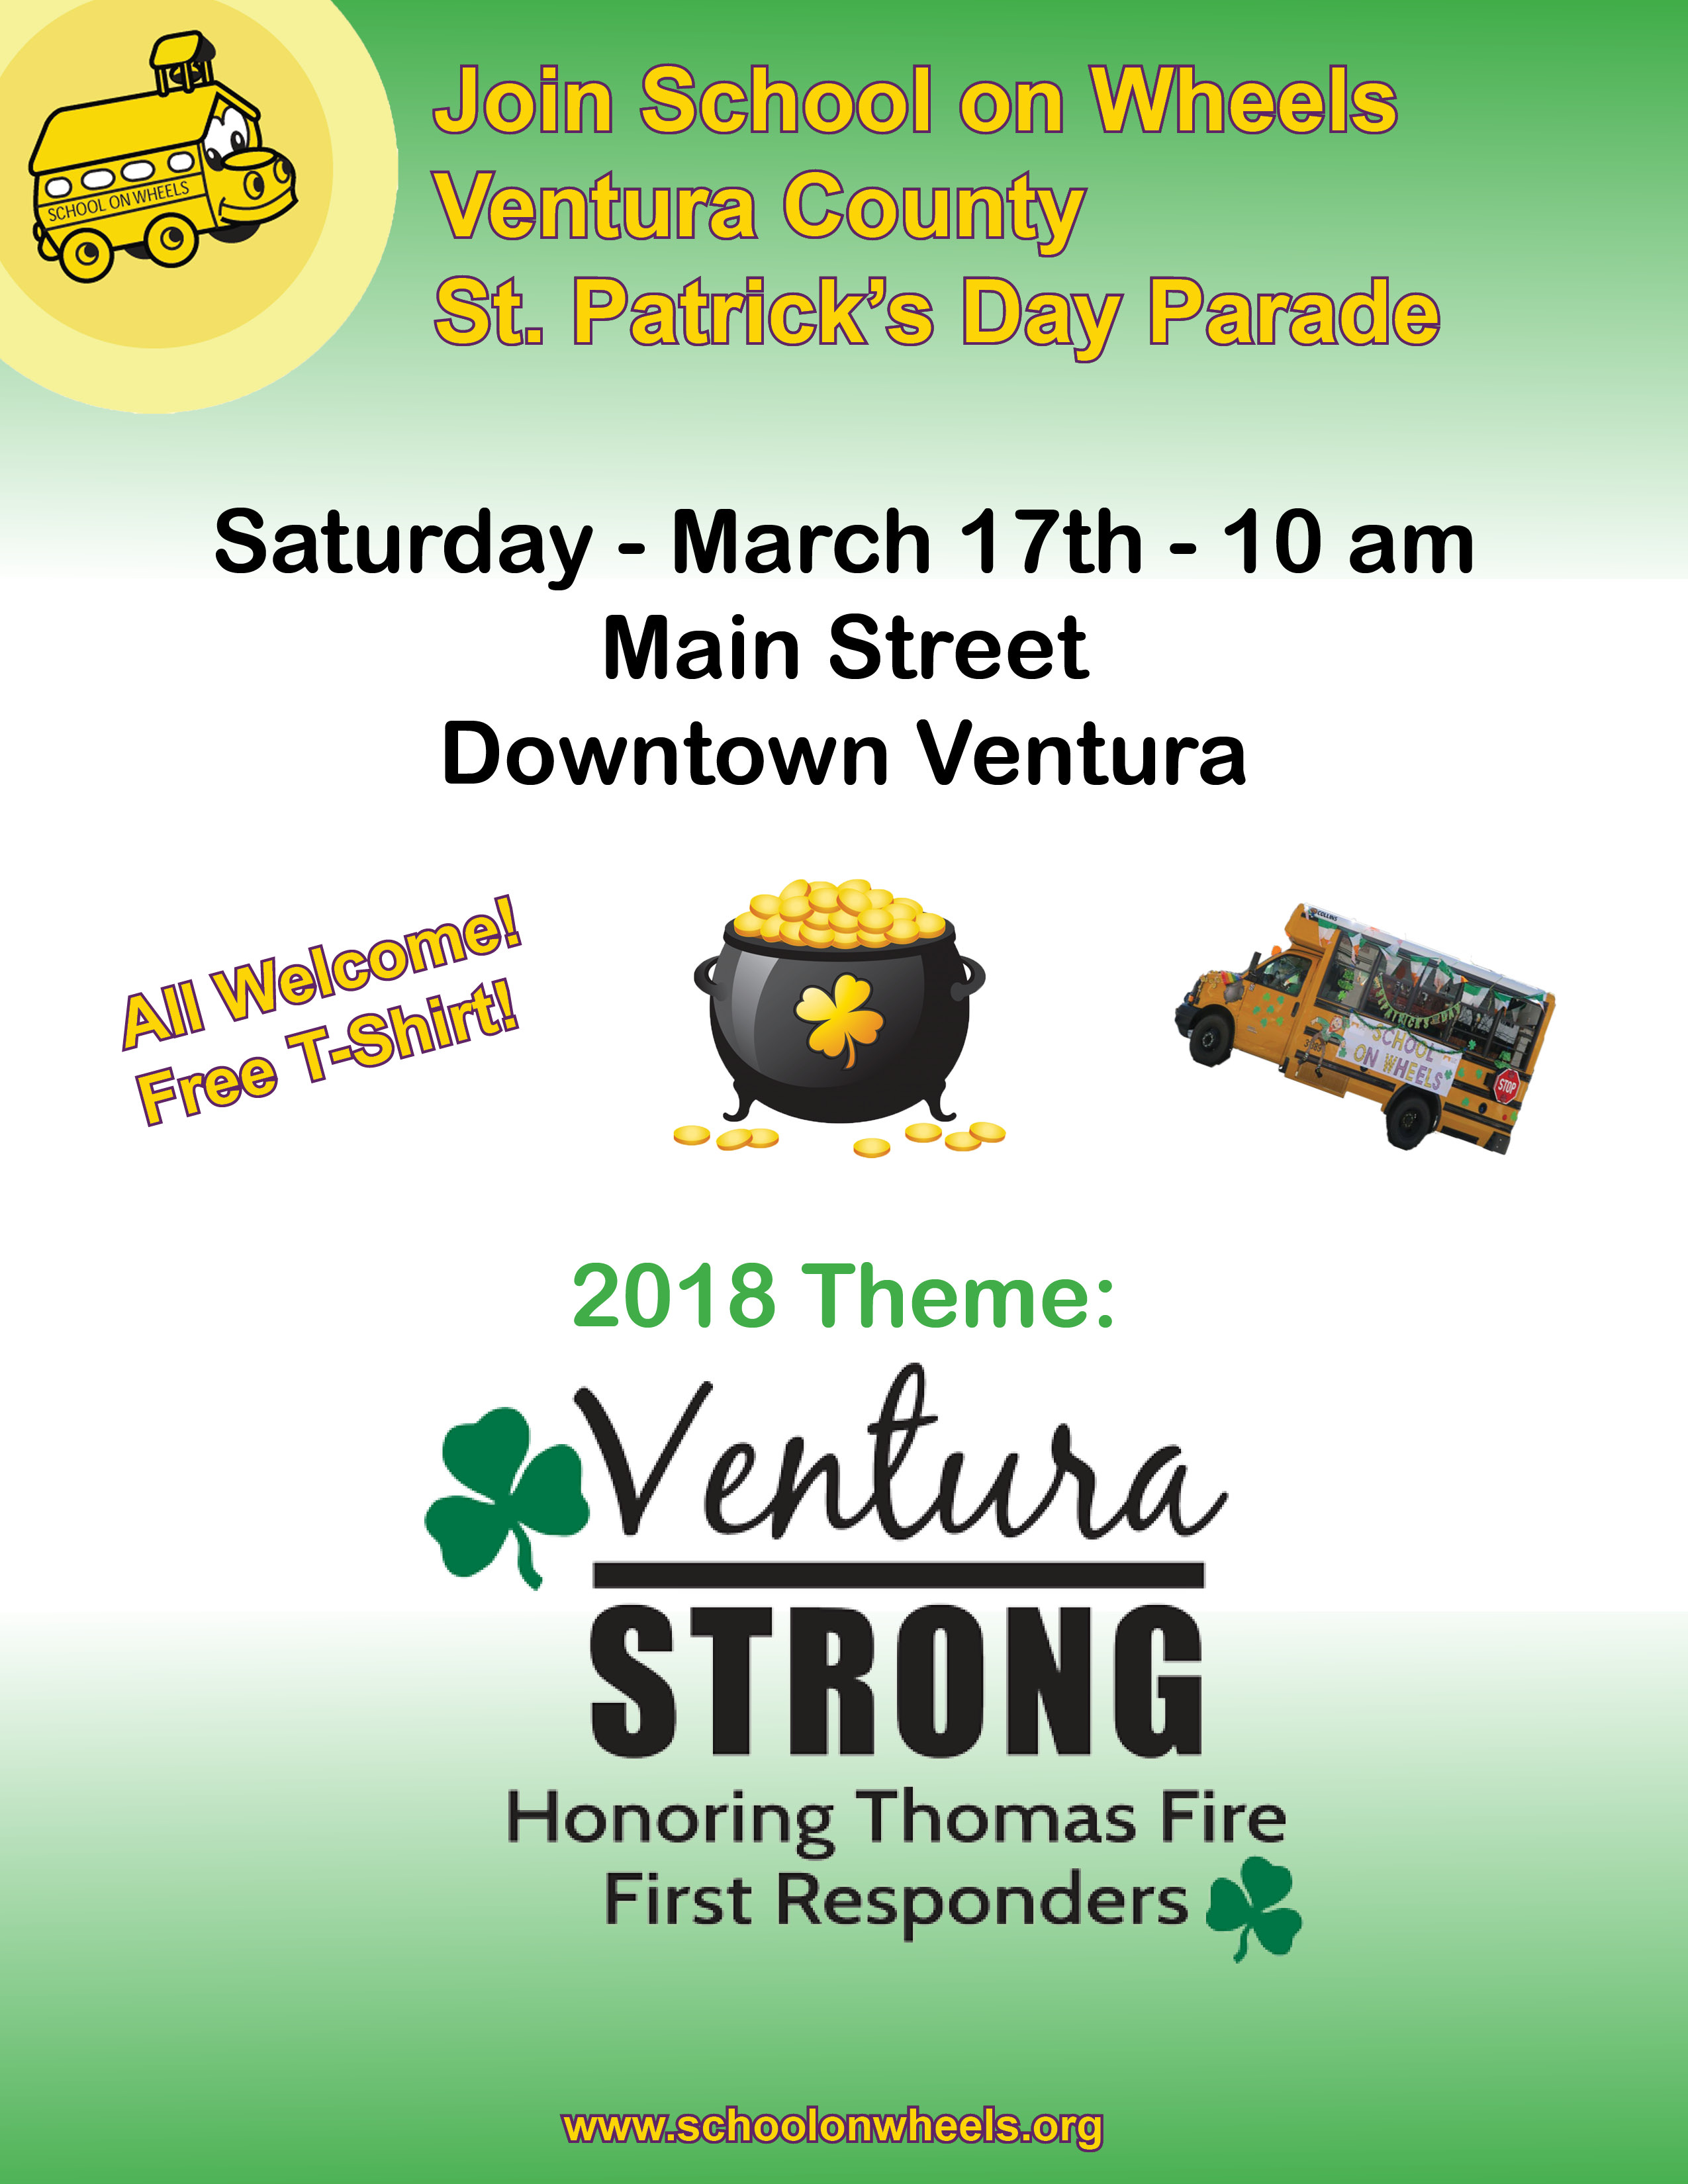 Join The Ventura County St. Patrick’s Day Parade